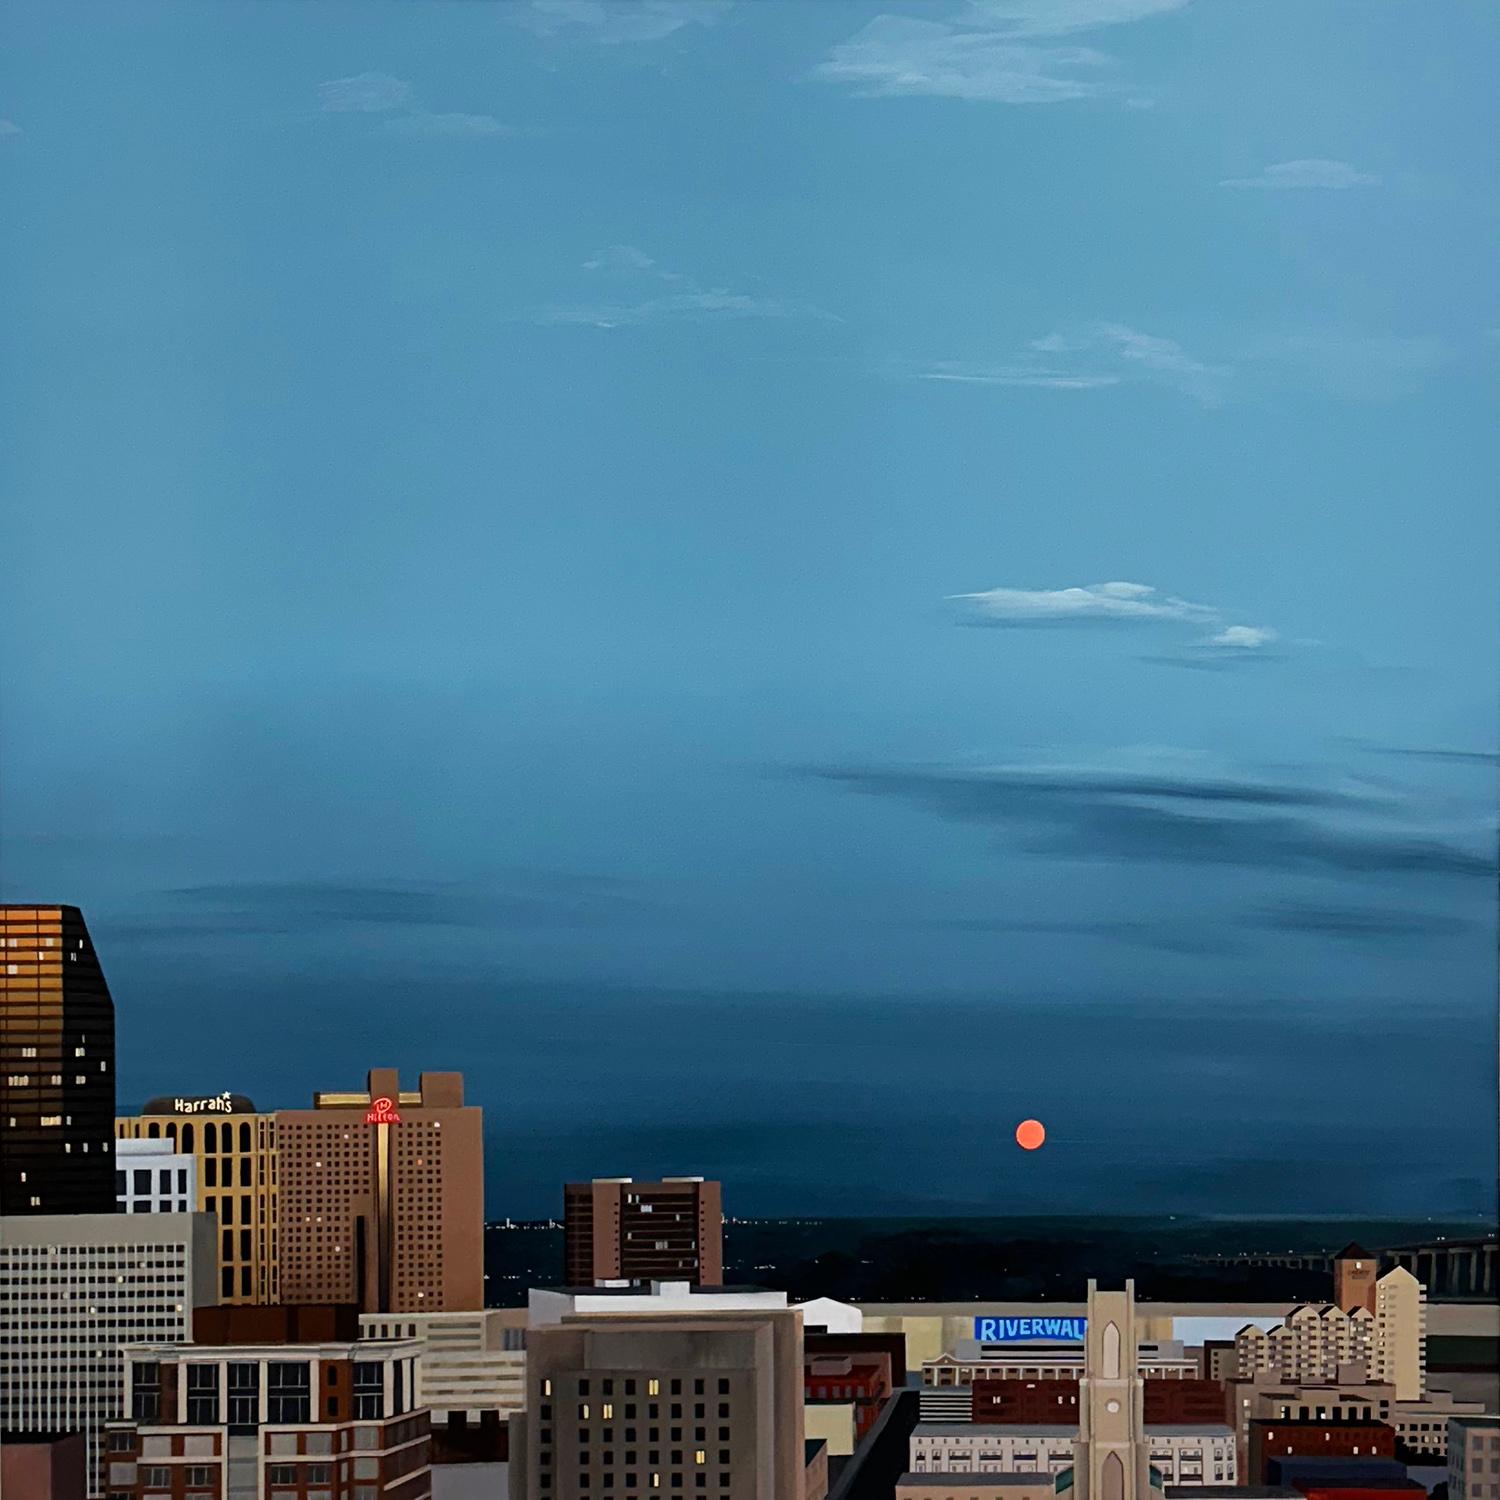 "Downtown New Orleans (Full Moon)", by Kristin Moore, is a part of her 2024 solo exhibition, “Through the Bayou, Into the Garden”, at Ferrara Showman Gallery. Marking a transition from her previous work, "Downtown New Orleans (Full Moon)" shows